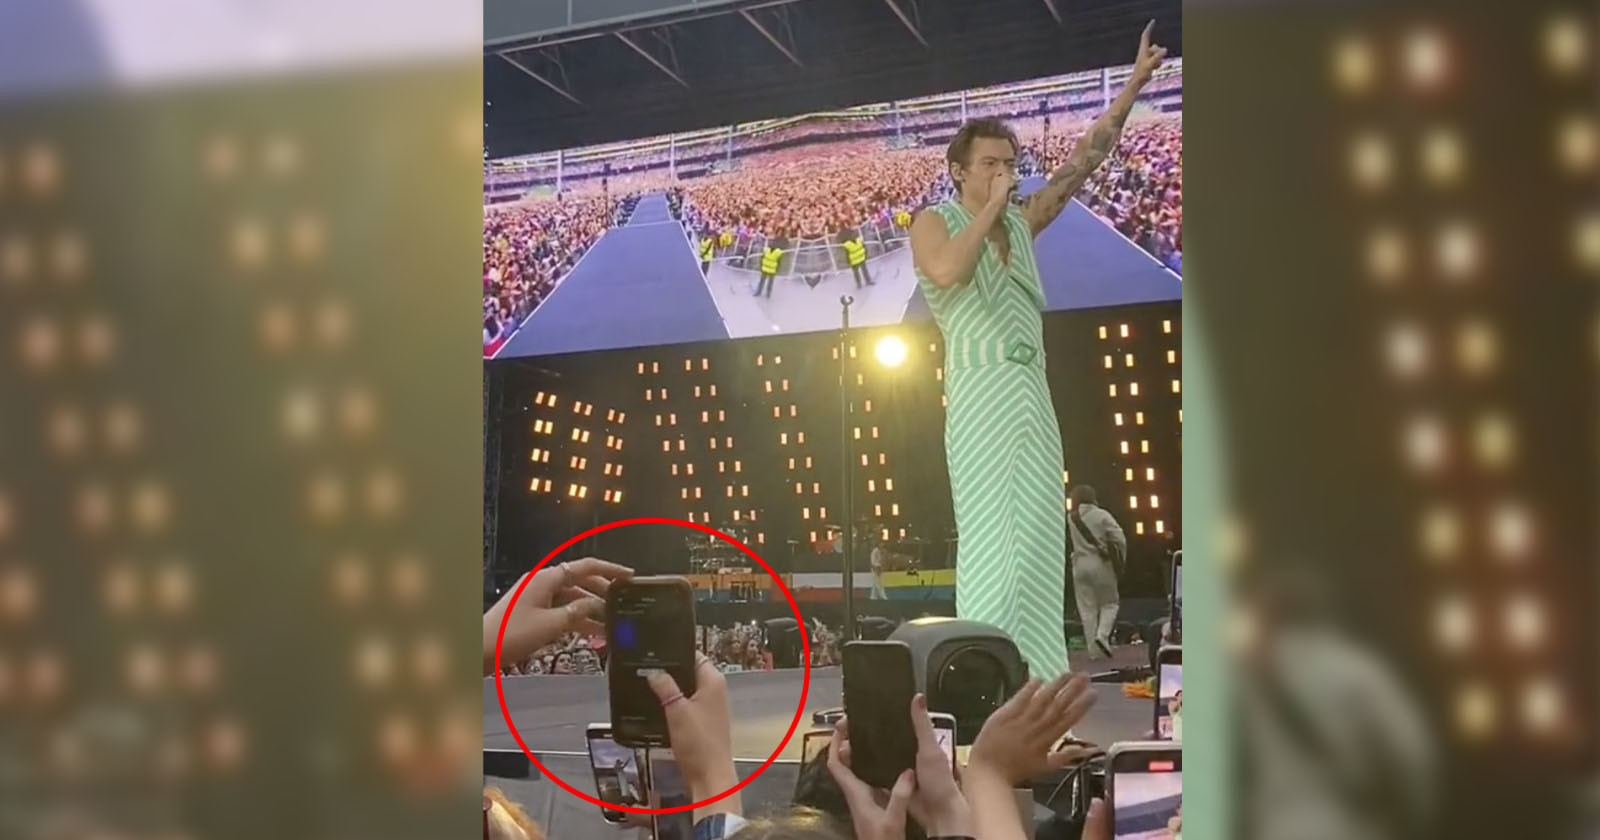 Harry Styles Fan Has BeReal Photo App Freeze at the Worst Moment